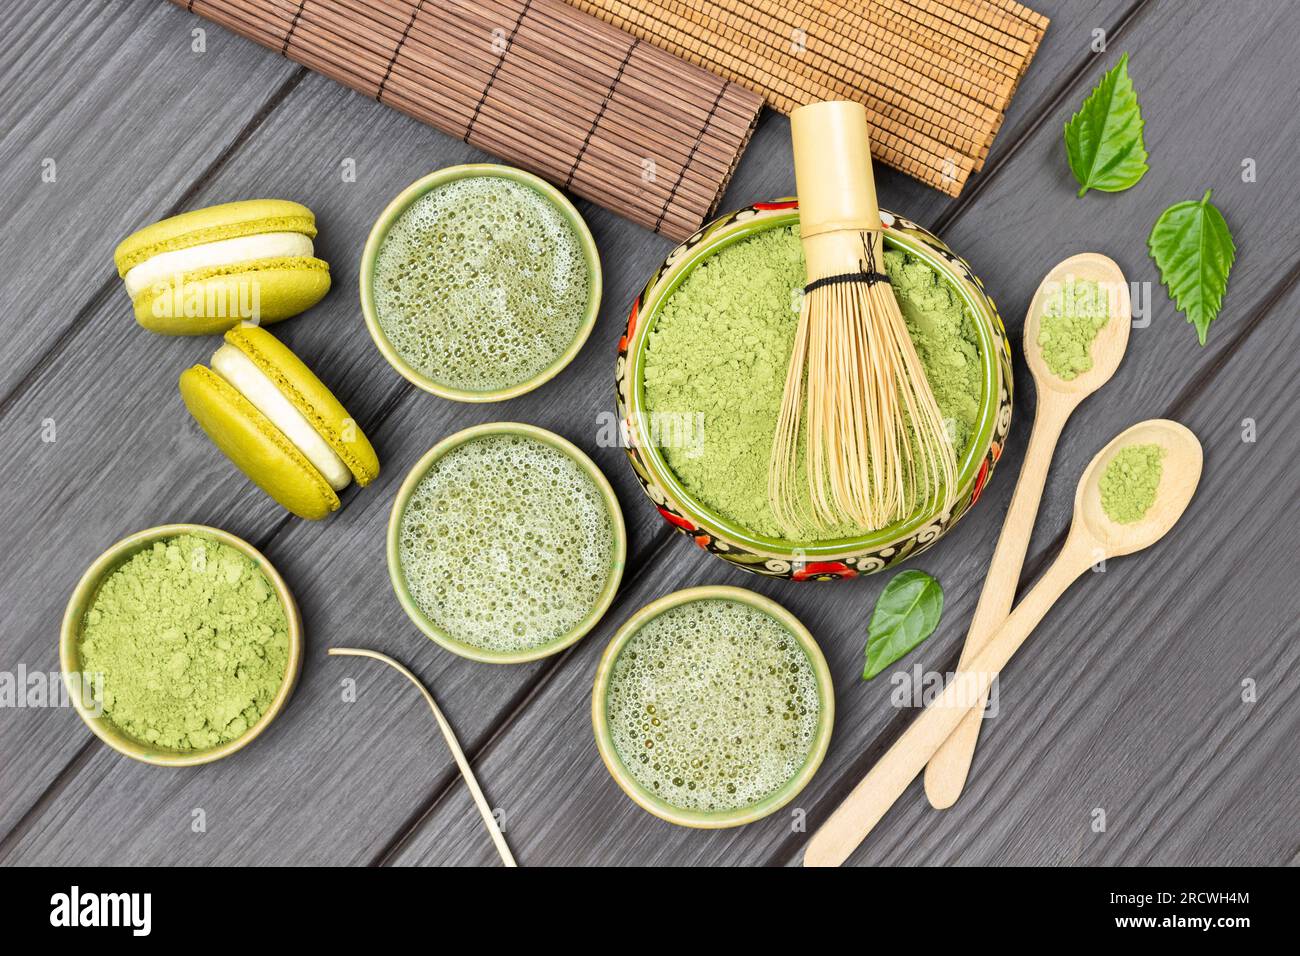 Bamboo whisk in bowl with matcha powder. Matcha green tea, macaroni cakes and wooden spoons on table. Flat lay. Dark wooden background Stock Photo